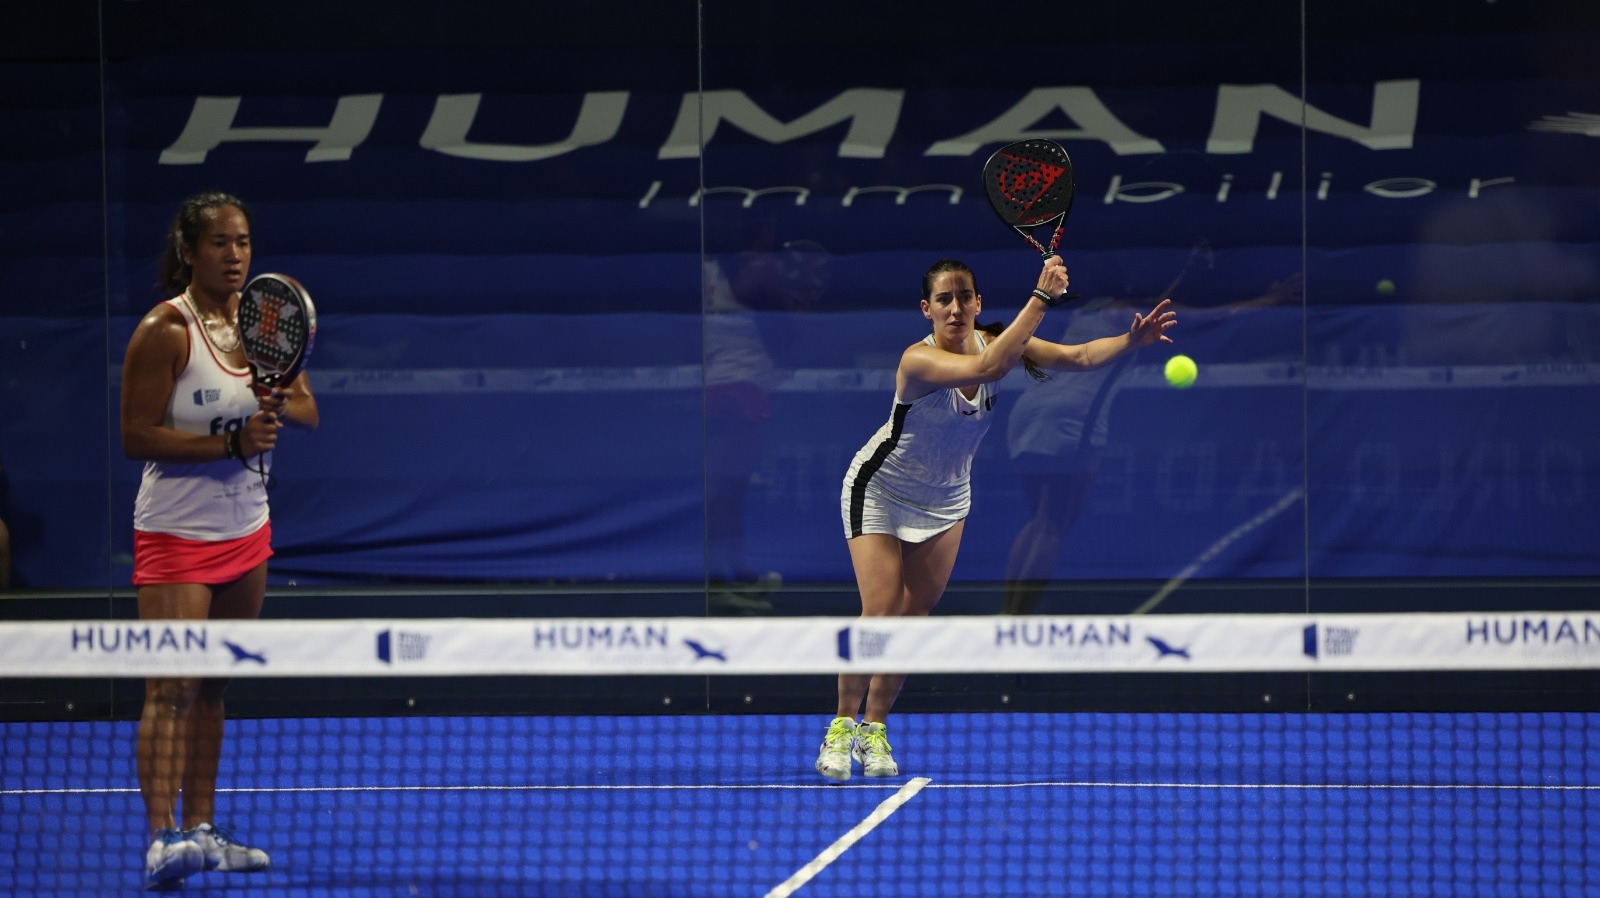 WPT Human Padel Open – Godallier and Navarro eliminated at the end of the suspense